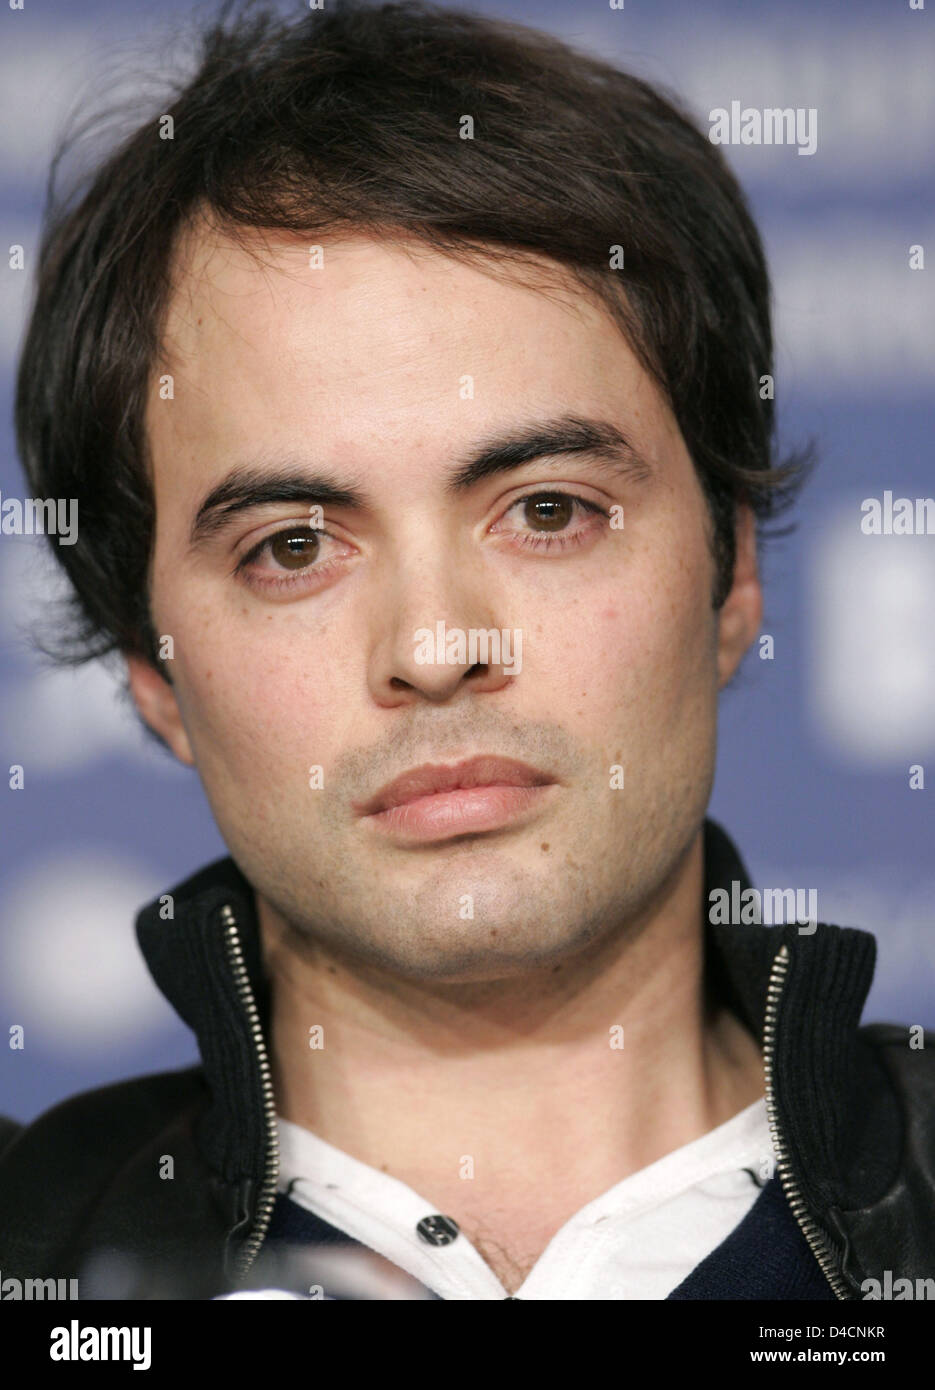 German actor and son of Klaus Kinski, Nikolai Kinski is pictured at a press conference at the 58th Berlin International Film Festival in Berlin, 11 February 2008. The Klaus Kinski documentary' Jesus Christ Saviour' runs in the Panorama section at the 58th Berlin Film Festival. Photo: Jan Woitas Stock Photo